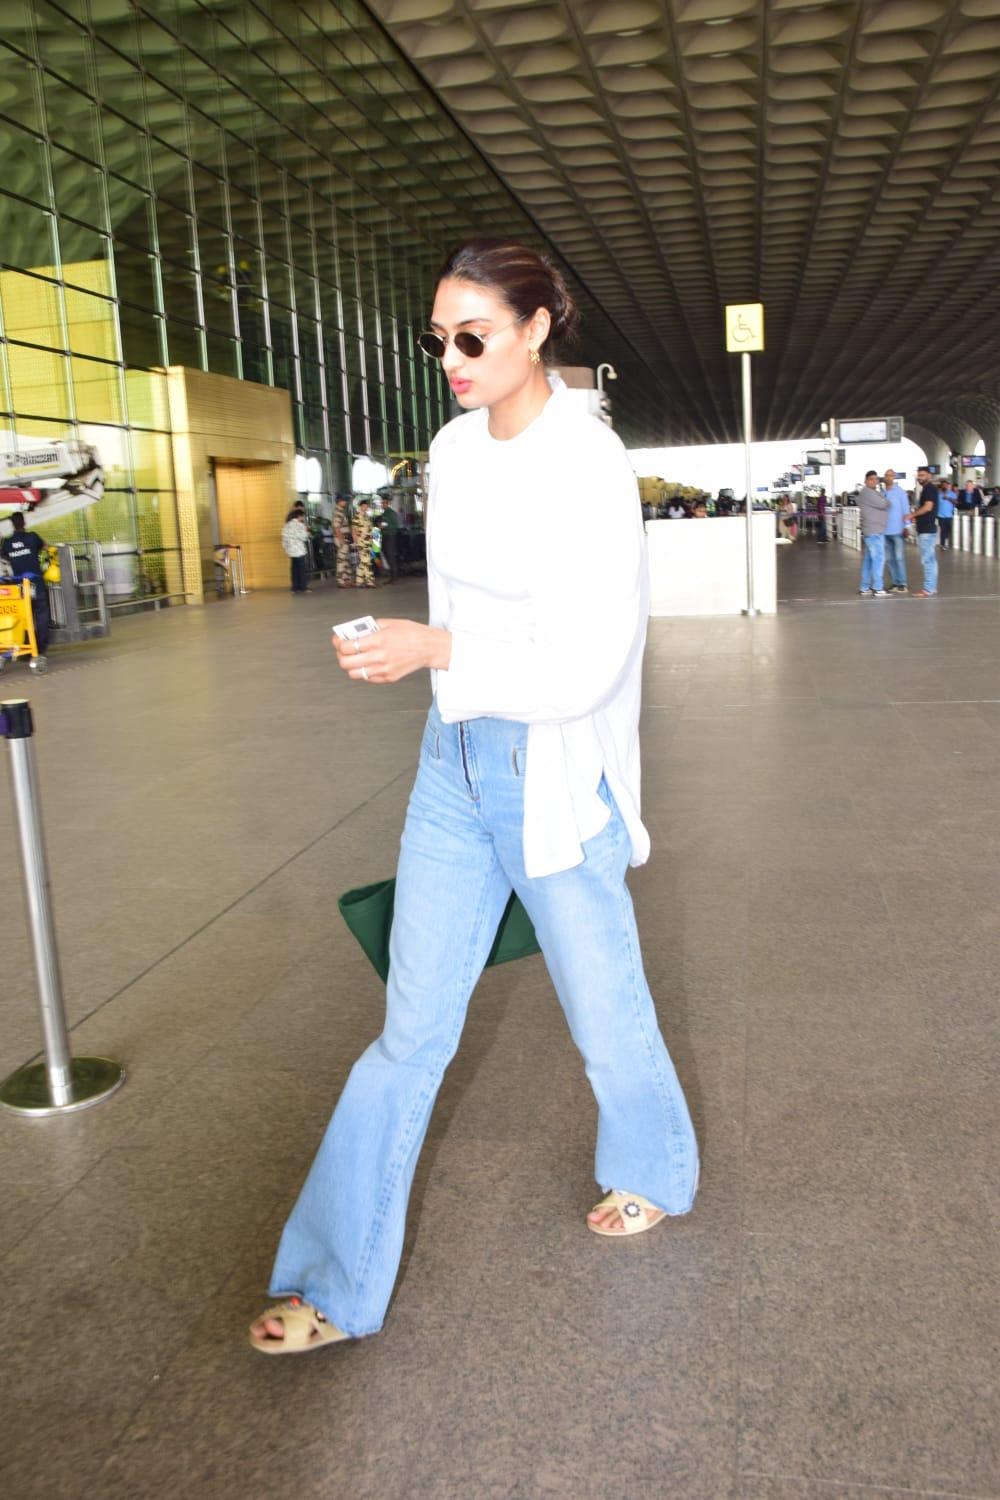 Athiya Shetty combined Summer aesthetics and airport fashion for her appearance at the Mumbai airport